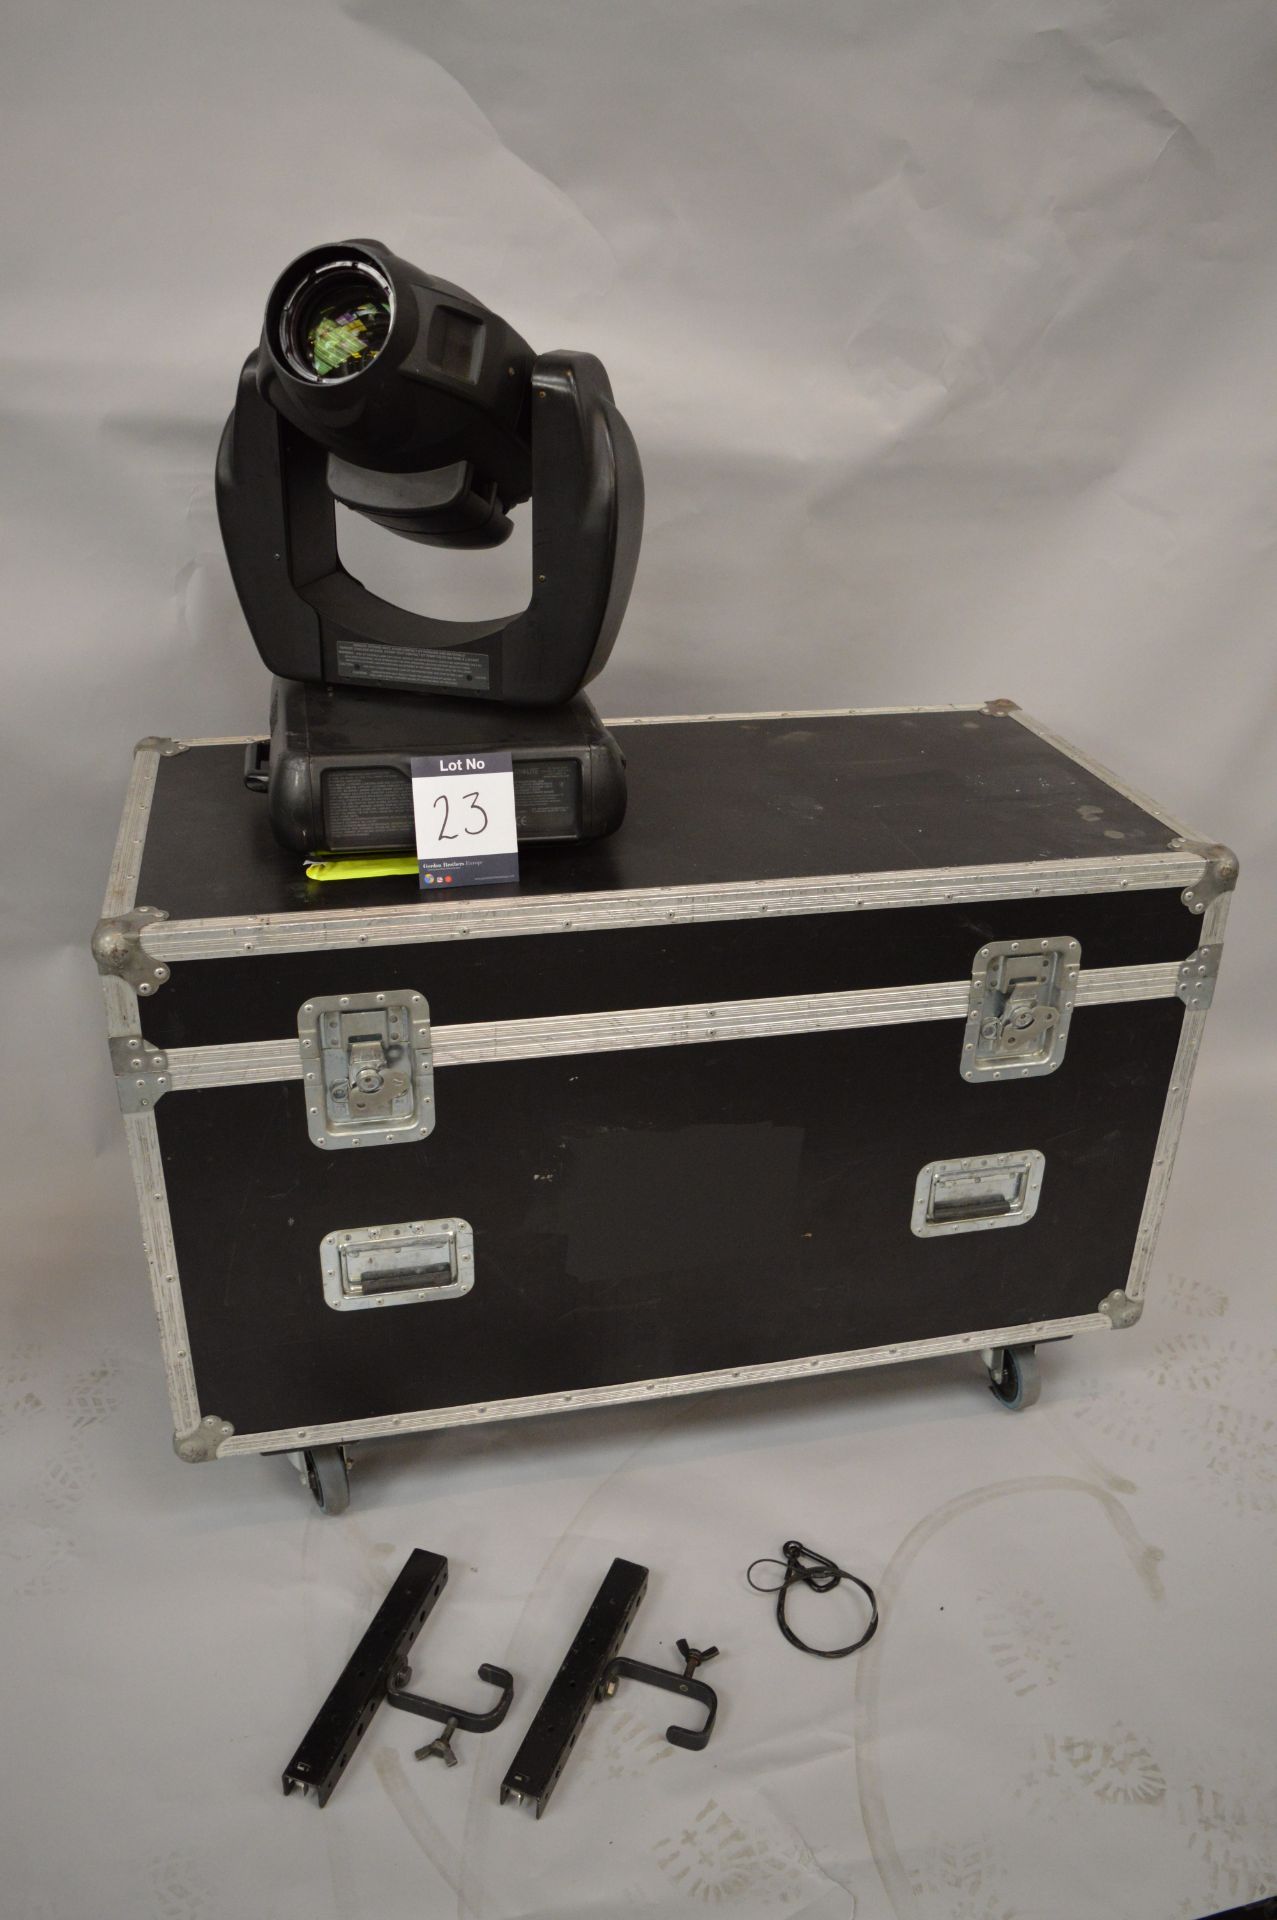 1 x Varilite, VL2000 Moving Head Spot Light with Flightcase and assoiated Brackets, as lotted (maybe